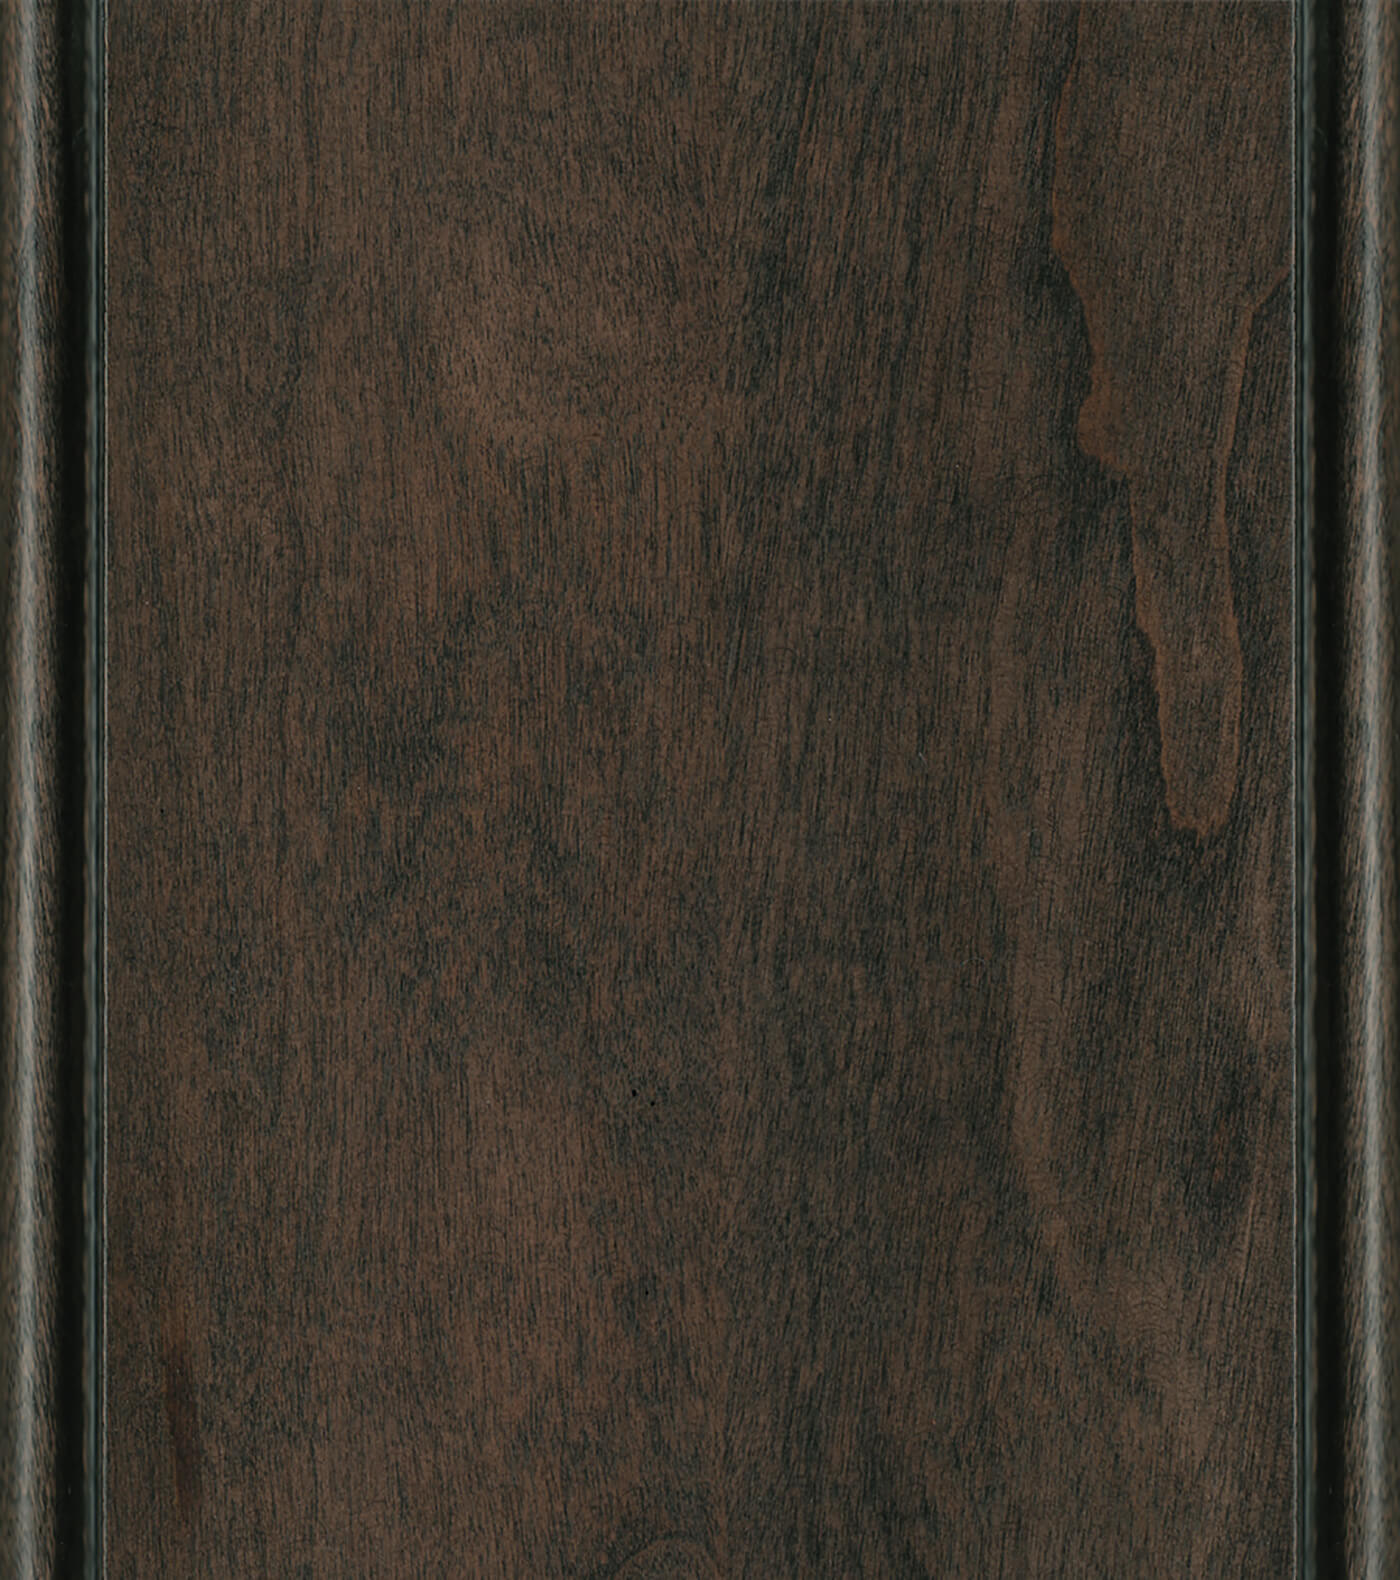 Caraway Stain on Cherry